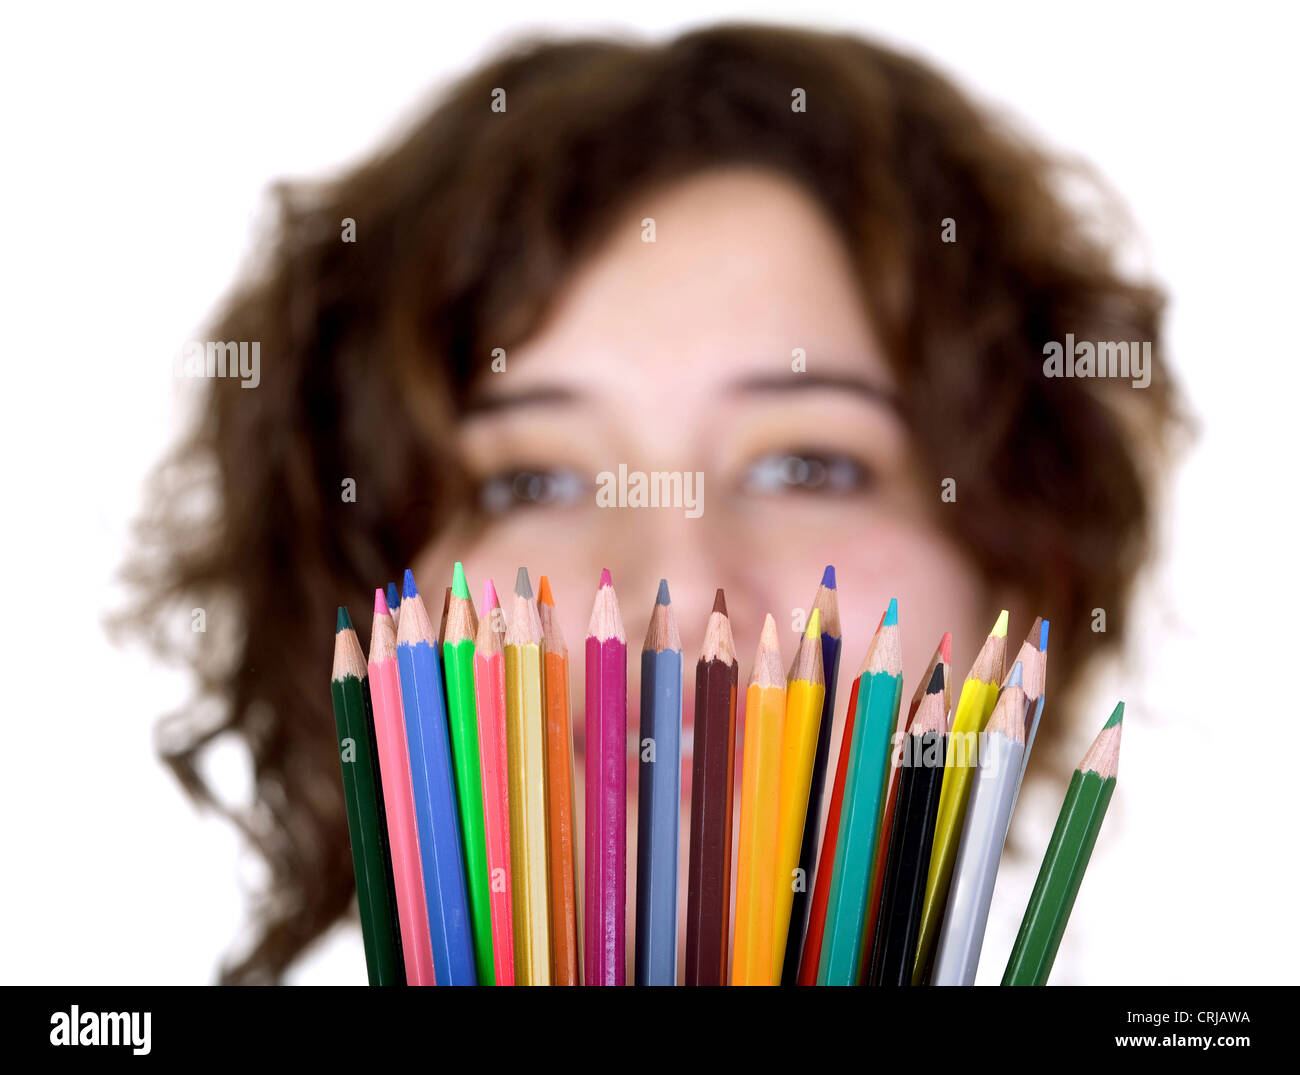 young girl looking over a fan of colourful pencils she is holding in front of her Stock Photo